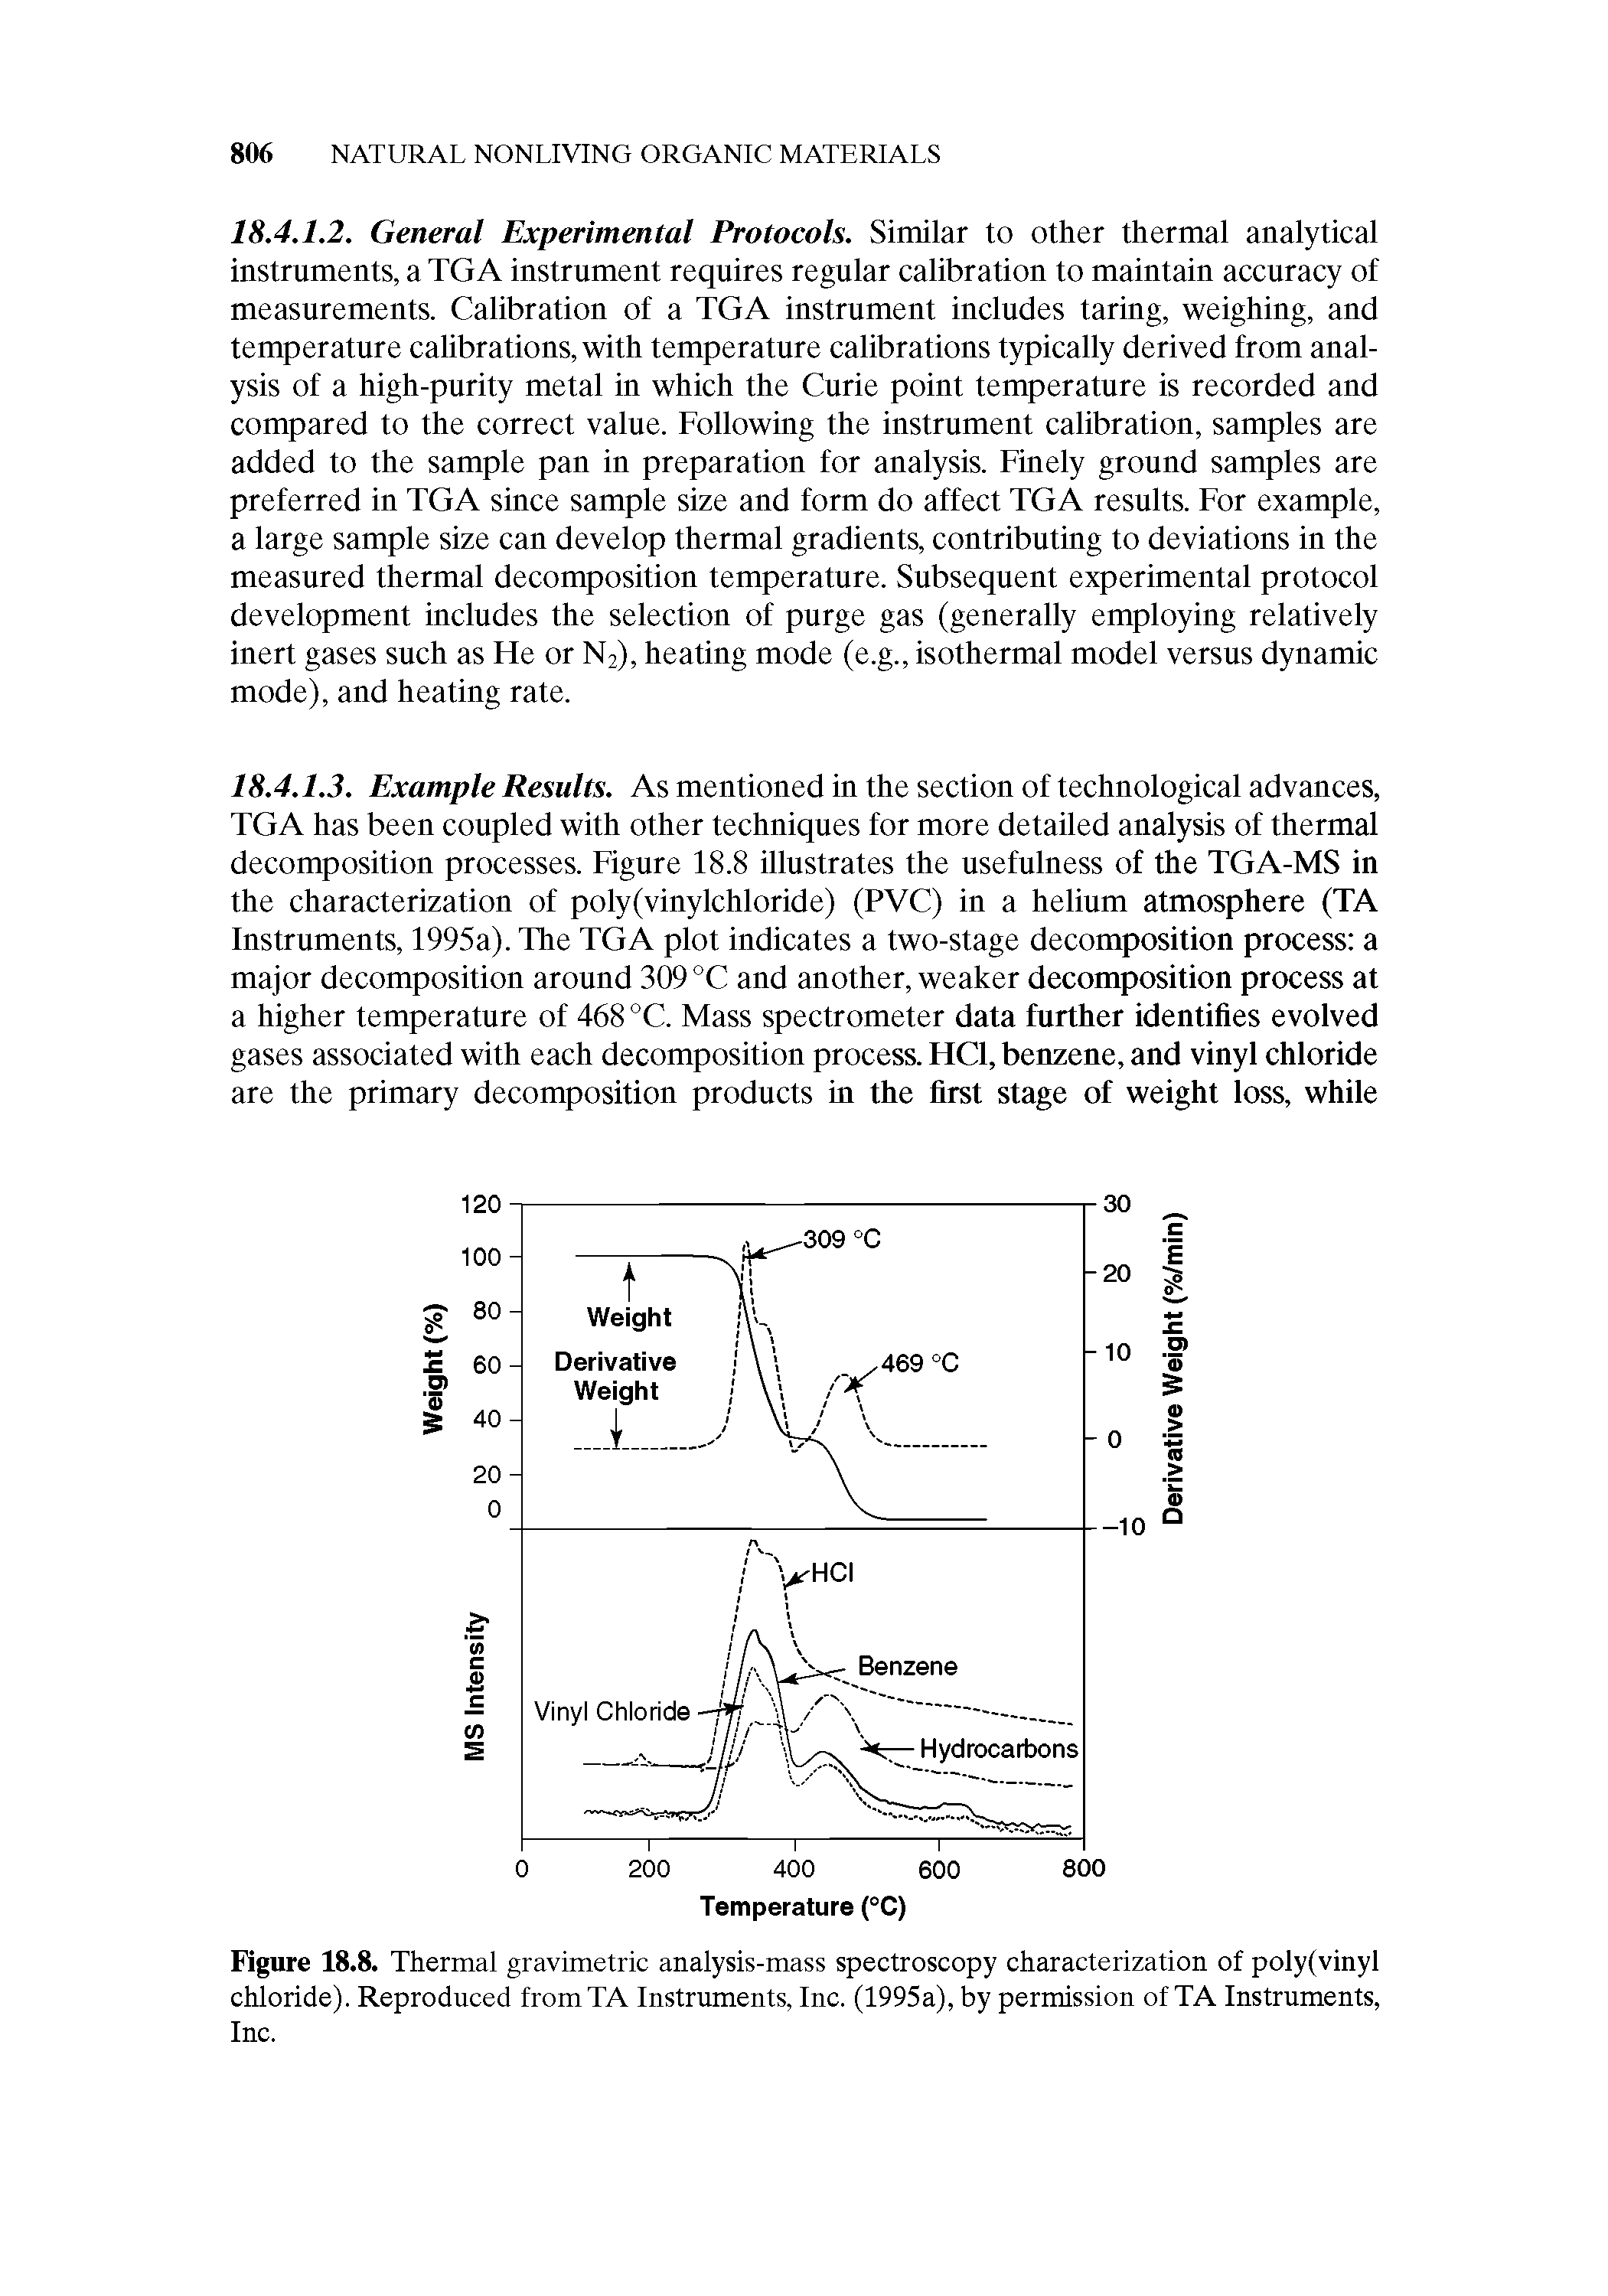 Figure 18.8. Thermal gravimetric analysis-mass spectroscopy characterization of poly(vinyl chloride). Reproduced fromTA Instruments, Inc. (1995a), by permission of TA Instruments, Inc.